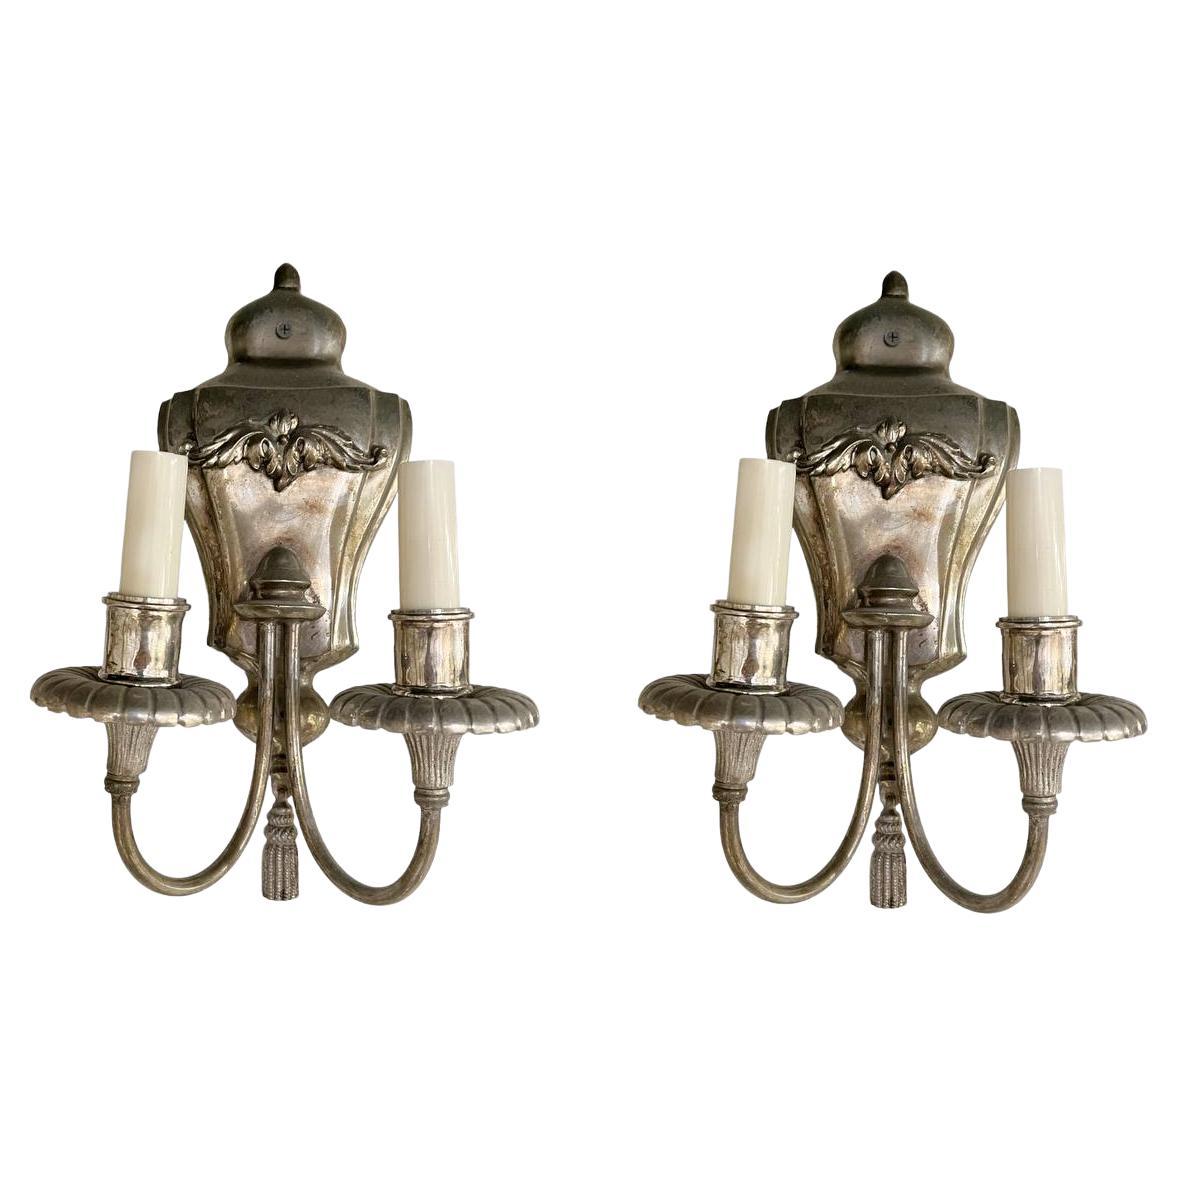 1930's English Silver Plated Sconces with 2 lights